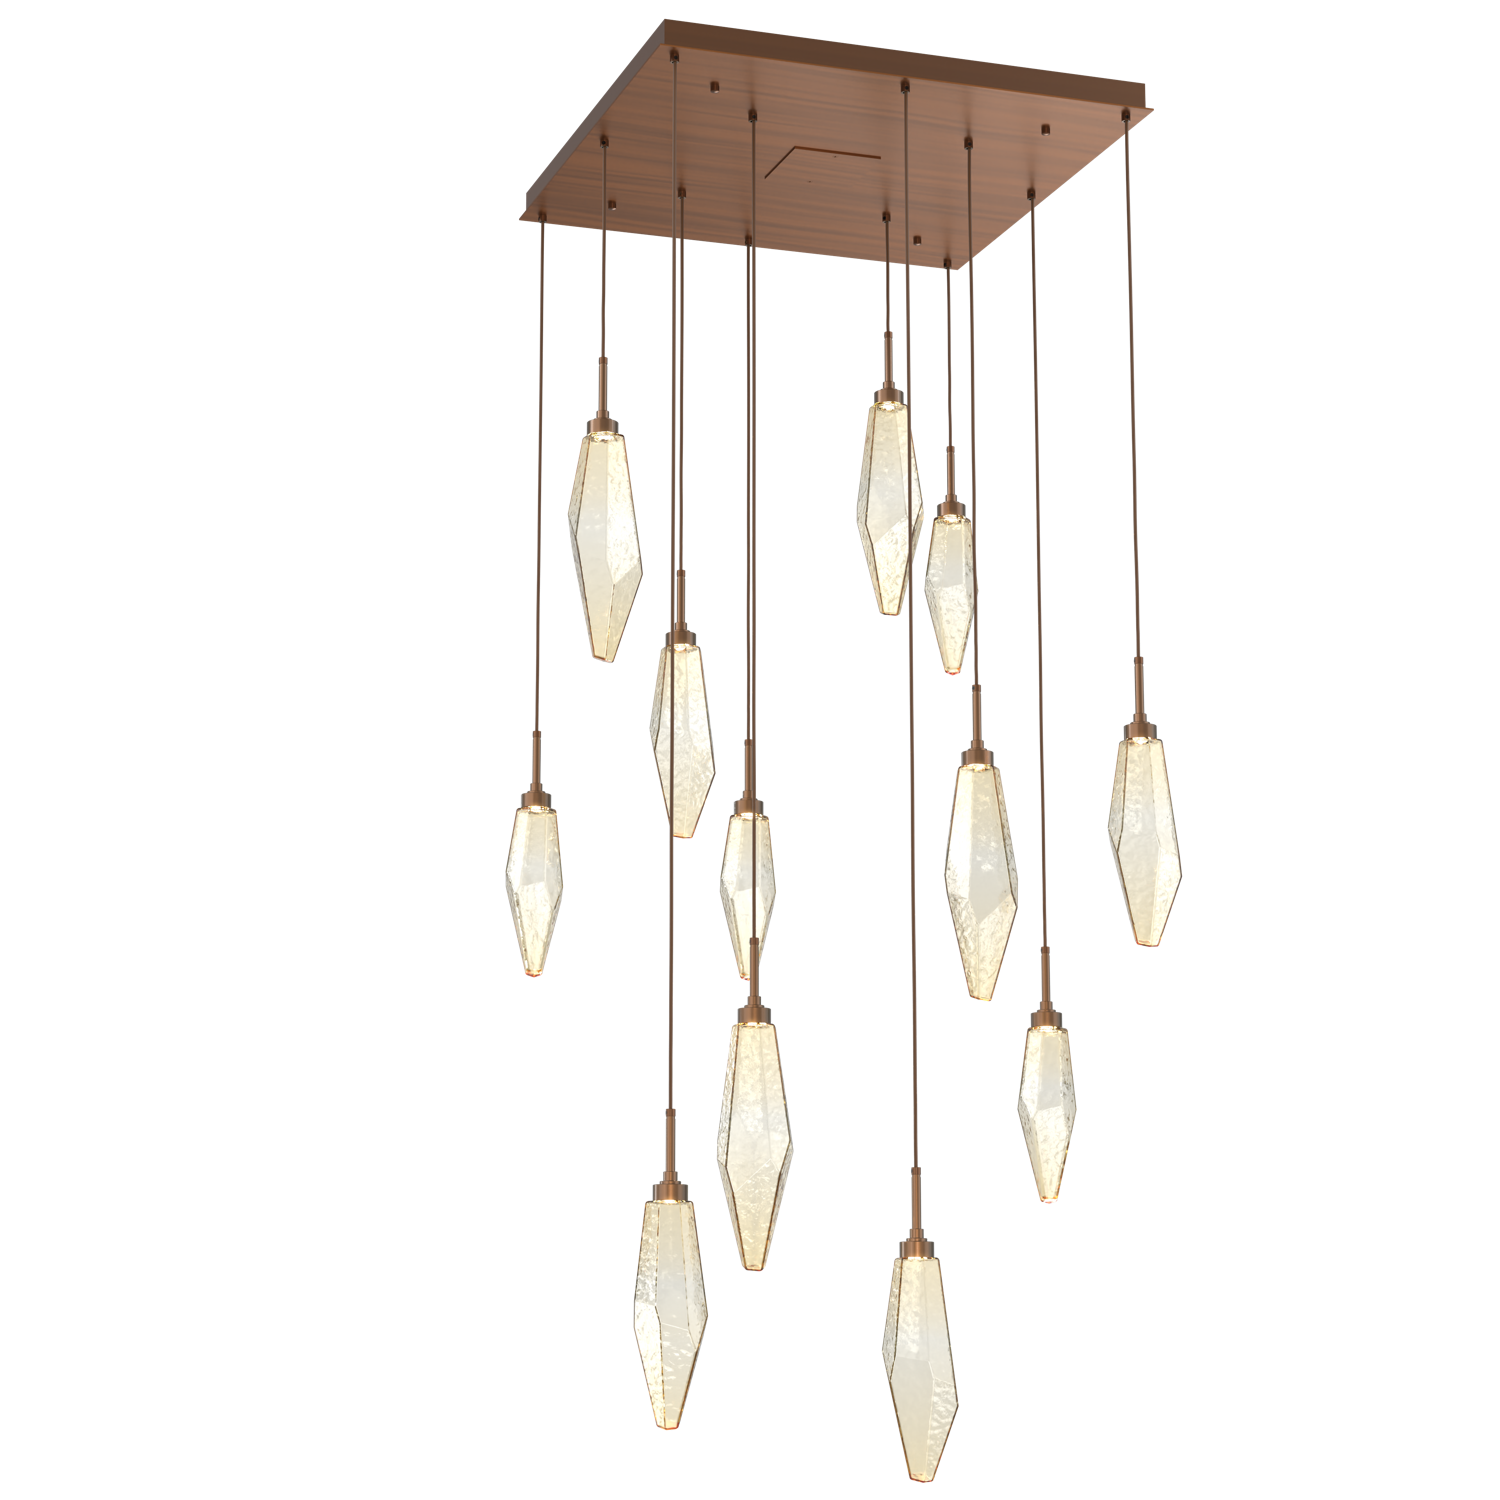 CHB0050-12-RB-CA-Hammerton-Studio-Rock-Crystal-12-light-square-pendant-chandelier-with-oil-rubbed-bronze-finish-and-chilled-amber-blown-glass-shades-and-LED-lamping